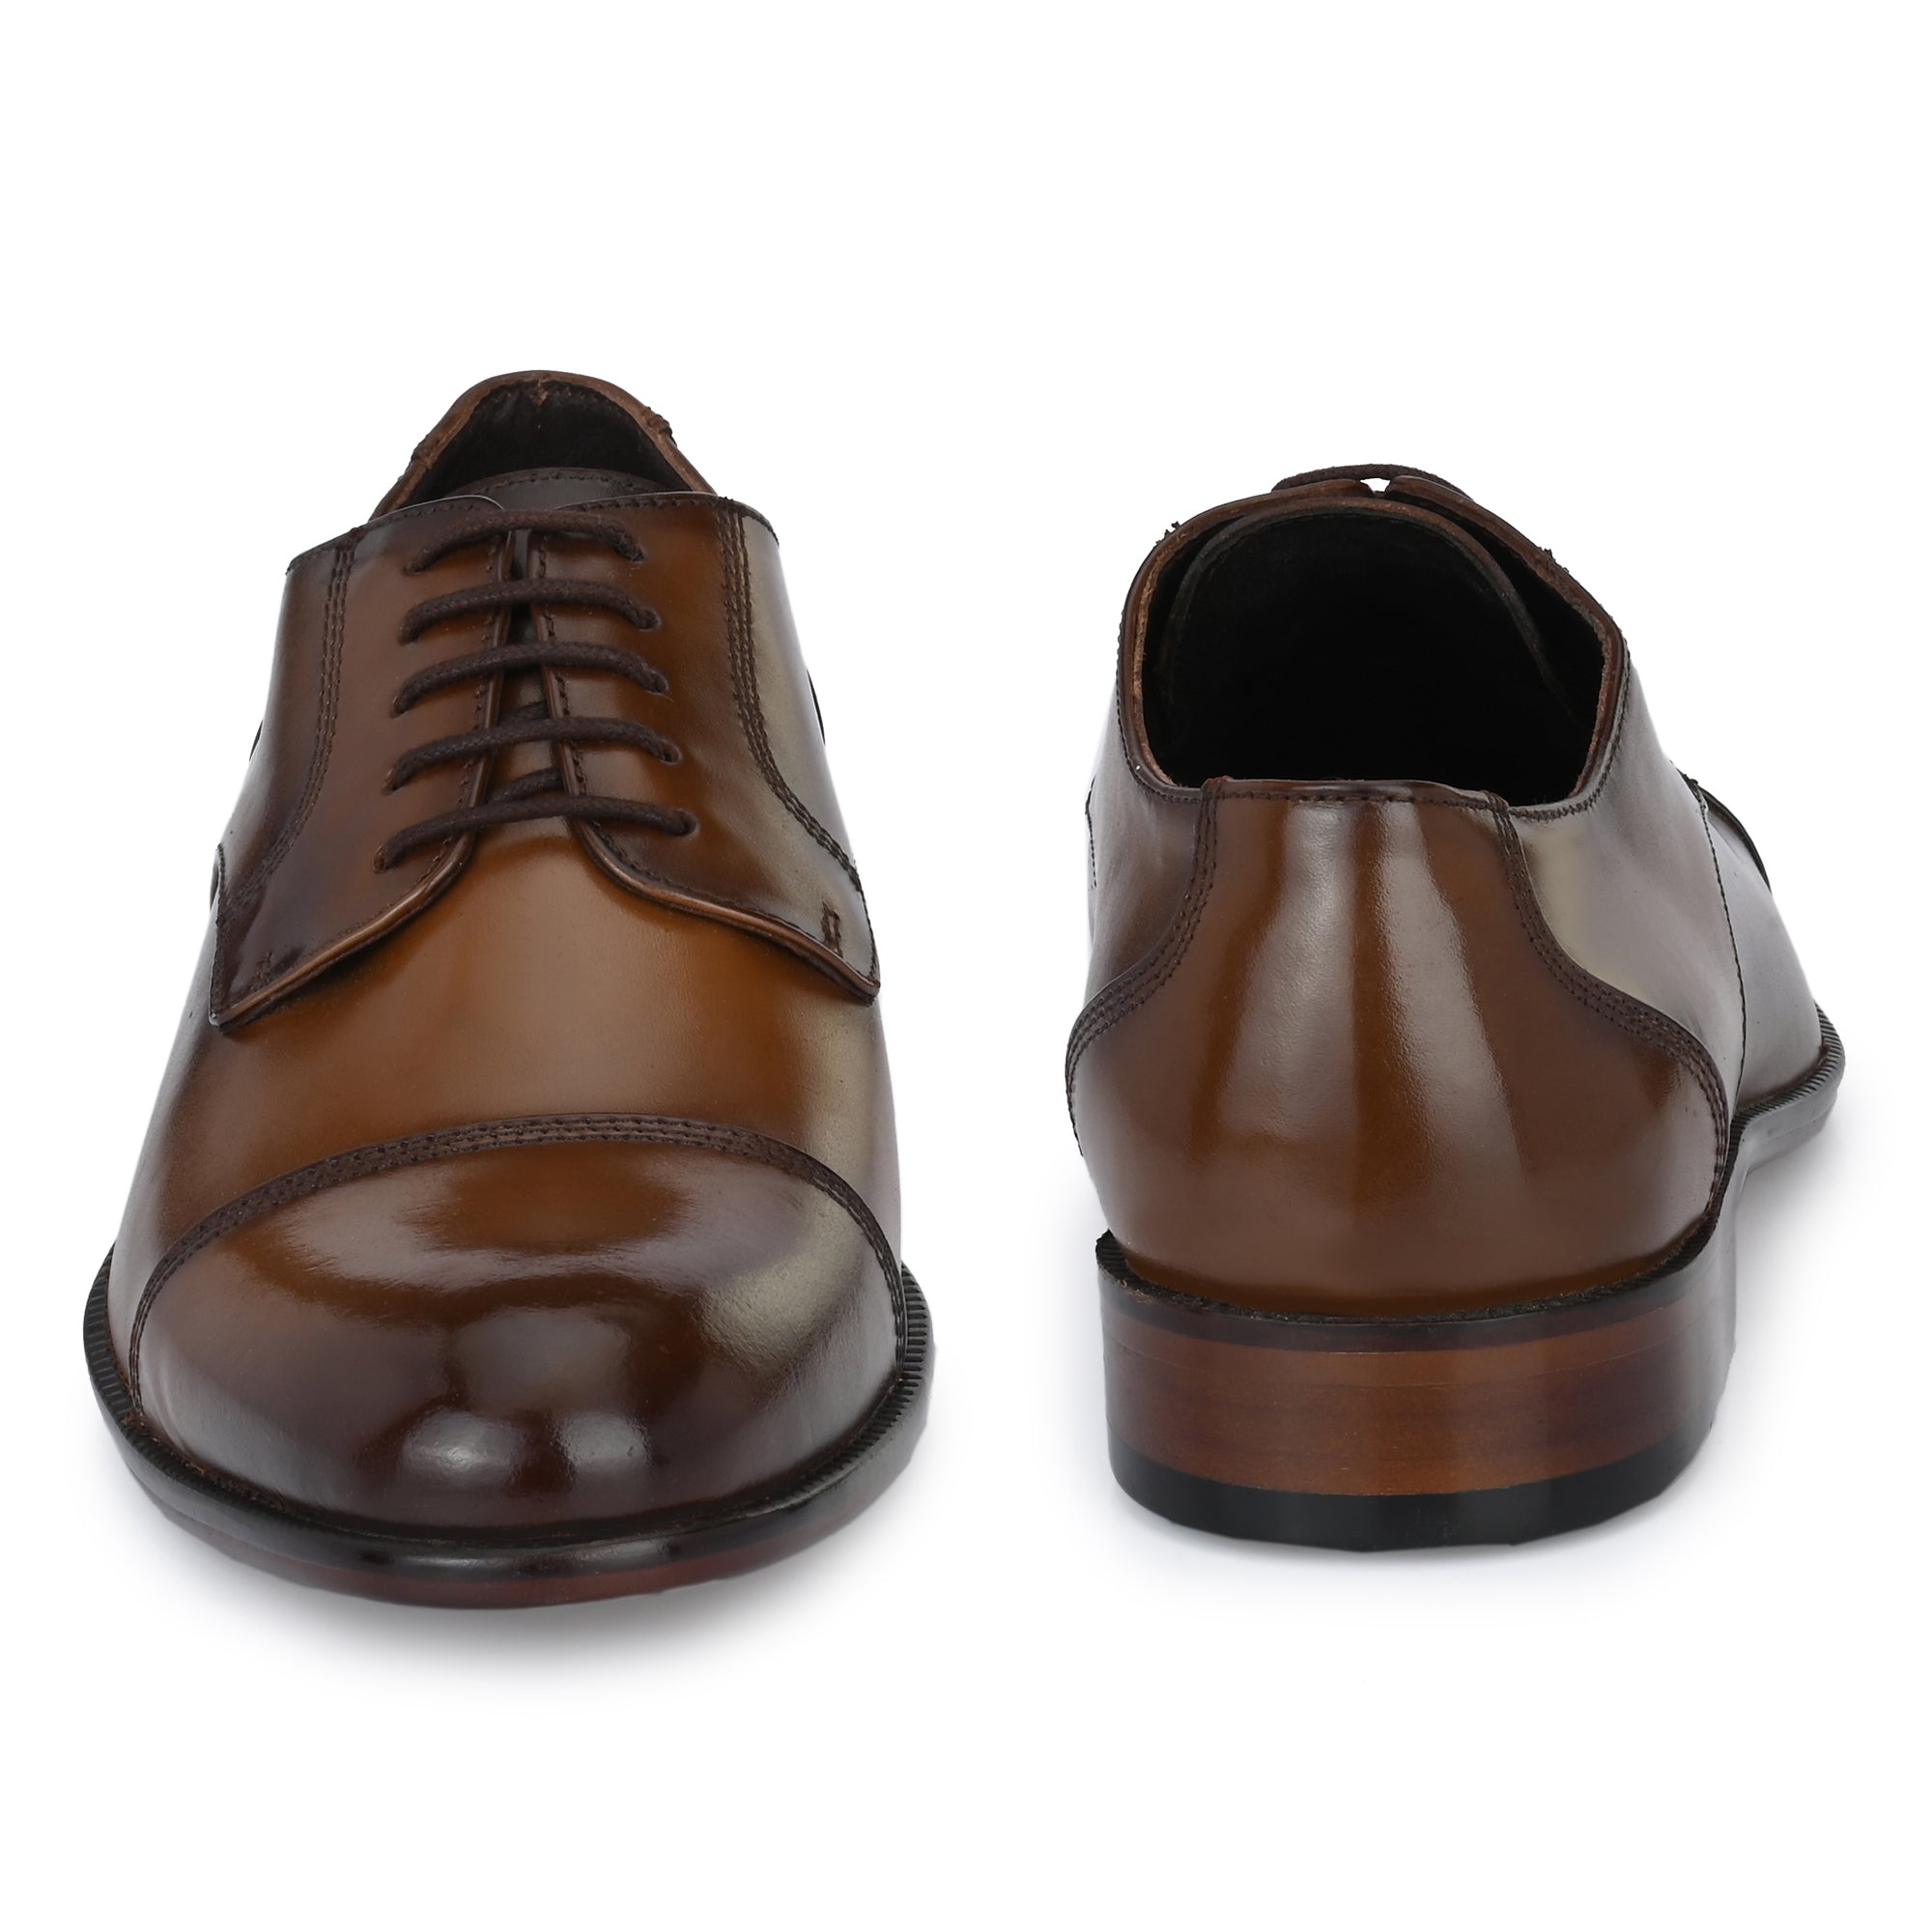 Tan Formal Lace-Up Shoes For Men